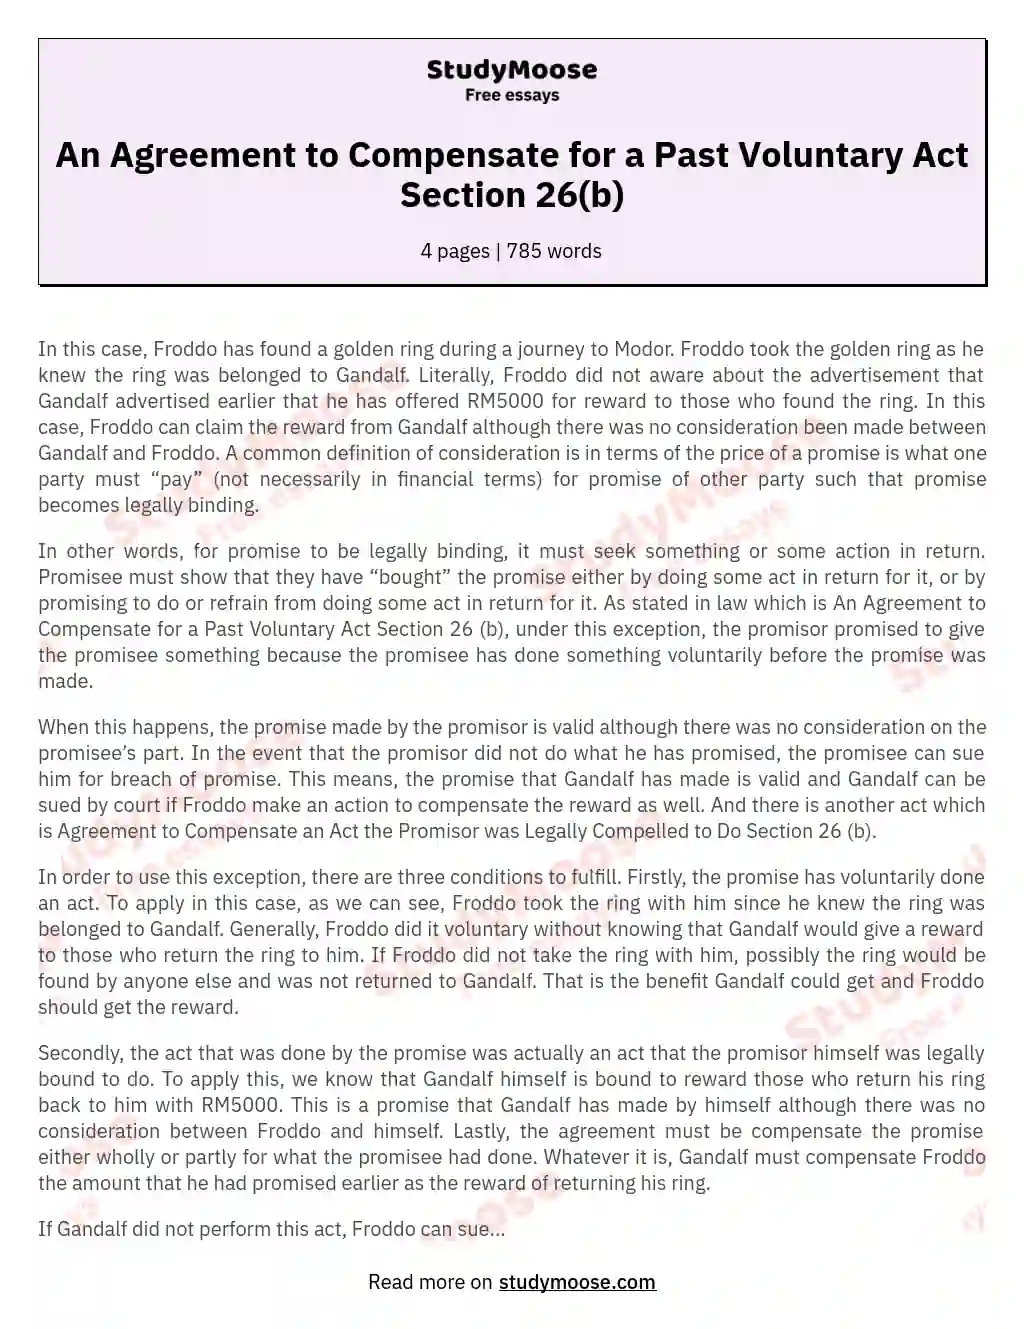 An Agreement to Compensate for a Past Voluntary Act Section 26(b) essay